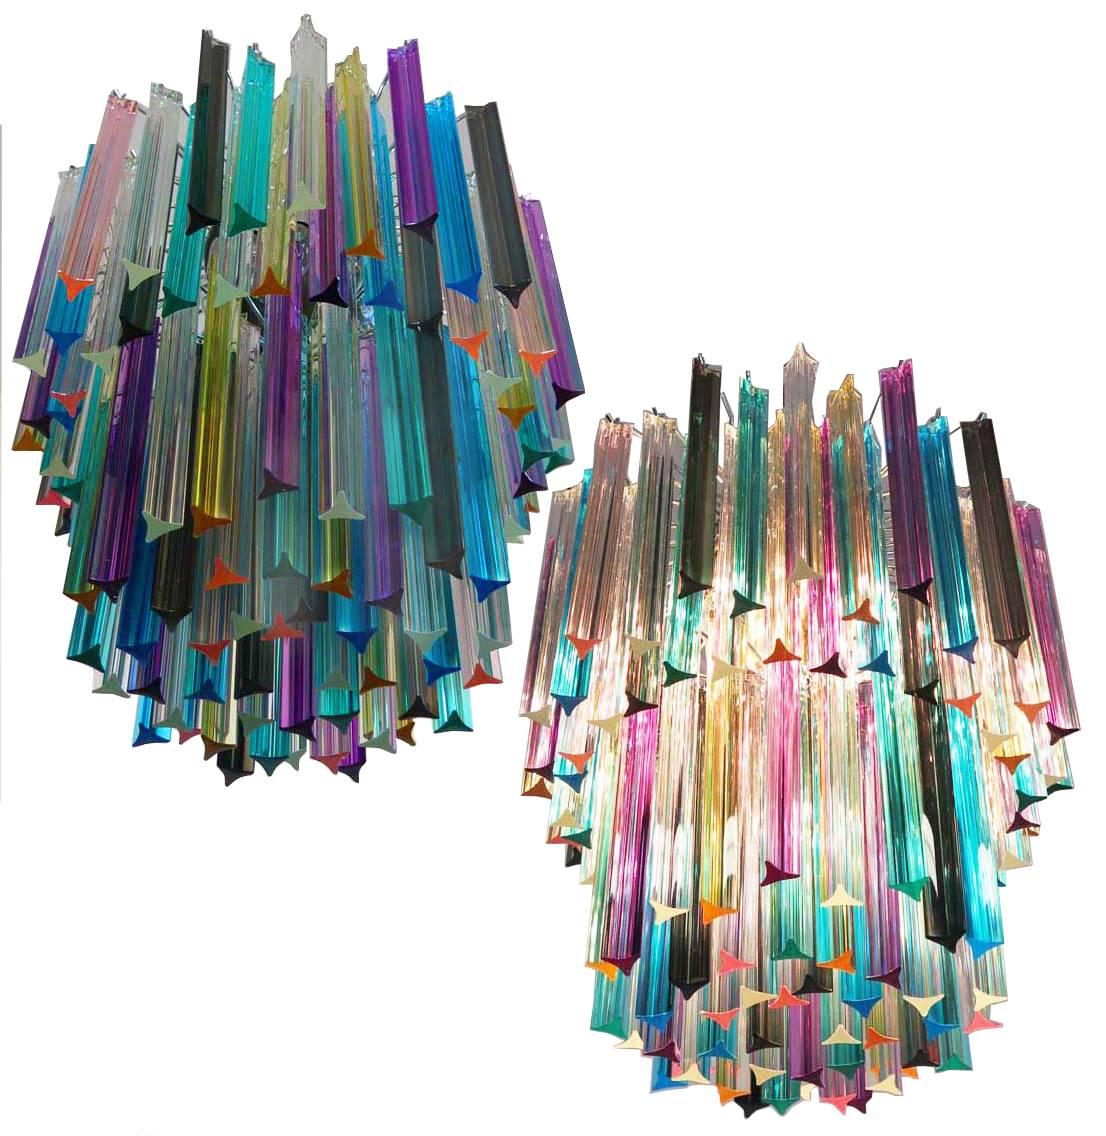 Fantastic Murano chandelier made by 107 Murano crystal multicolored prism in a nickel metal frame. The glasses are transparent, blue, smoky, purple, green, yellow and pink.
Dimensions: 55.10 inches height (140cm) with chain, 29.50 inches height